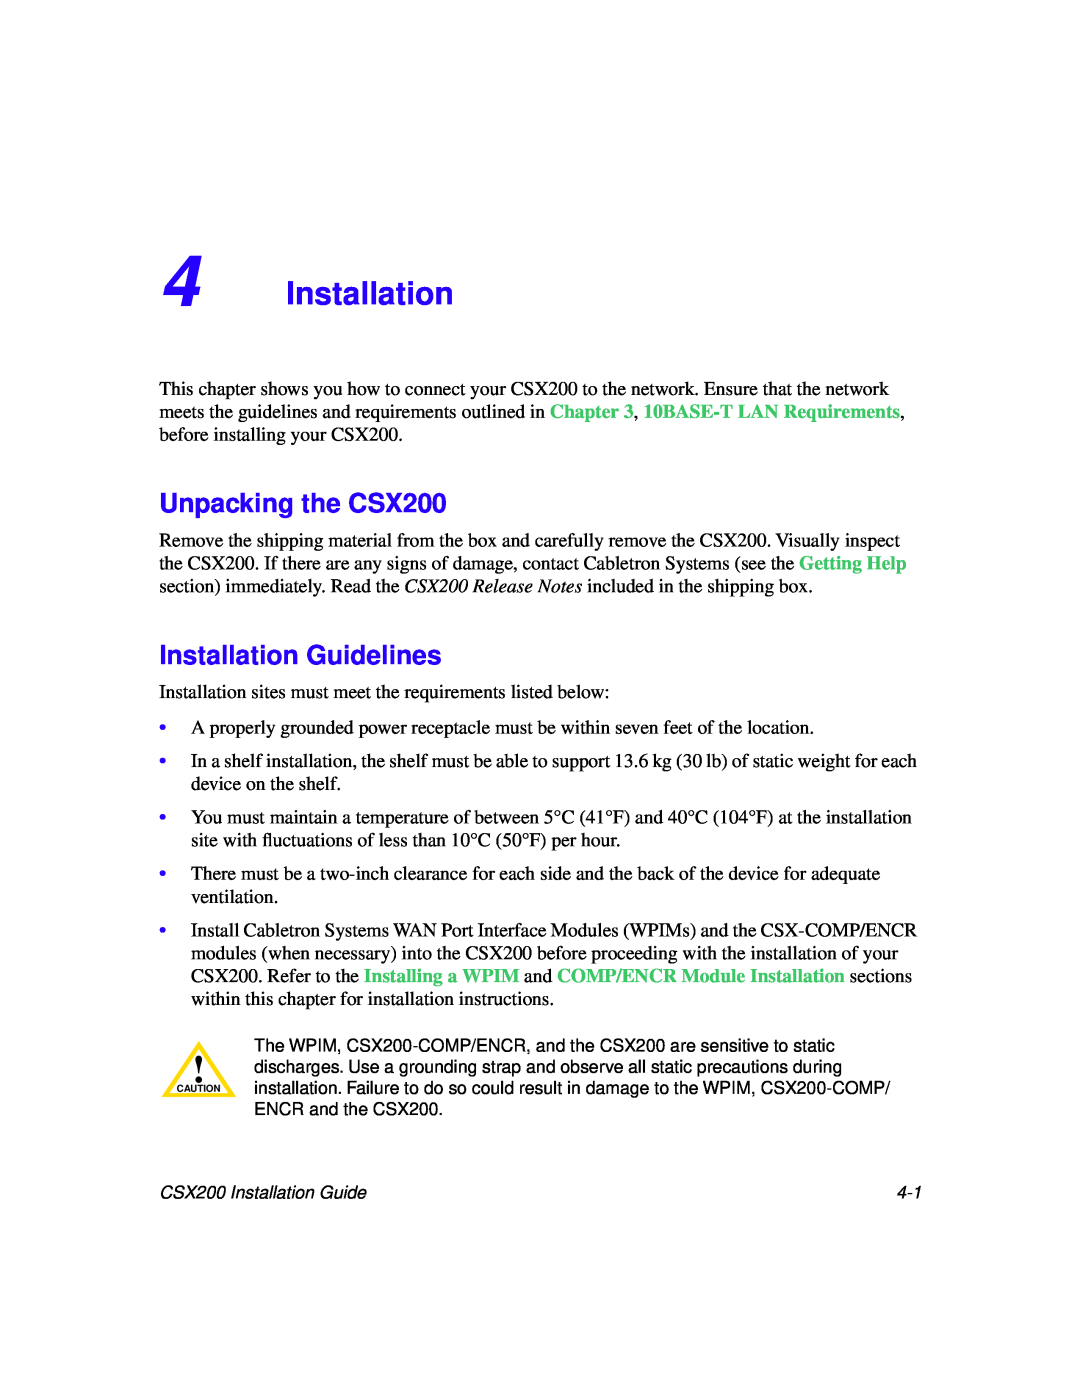 Cabletron Systems manual Unpacking the CSX200, Installation Guidelines 